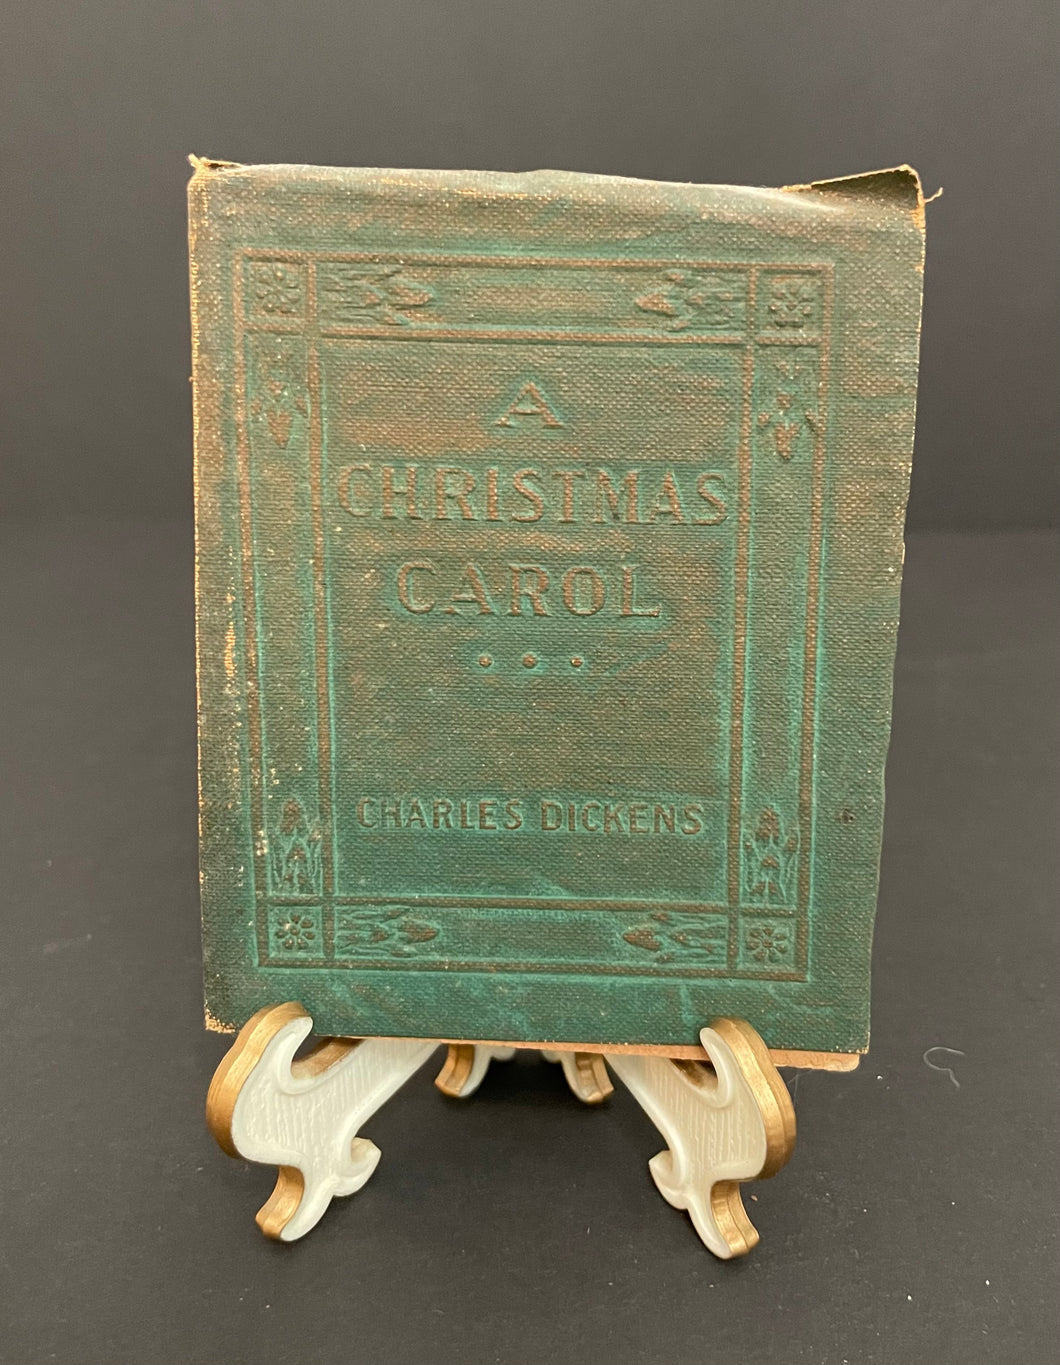 Antique Little Leather Library “A Christmas Carol” by Charles Dickens Book